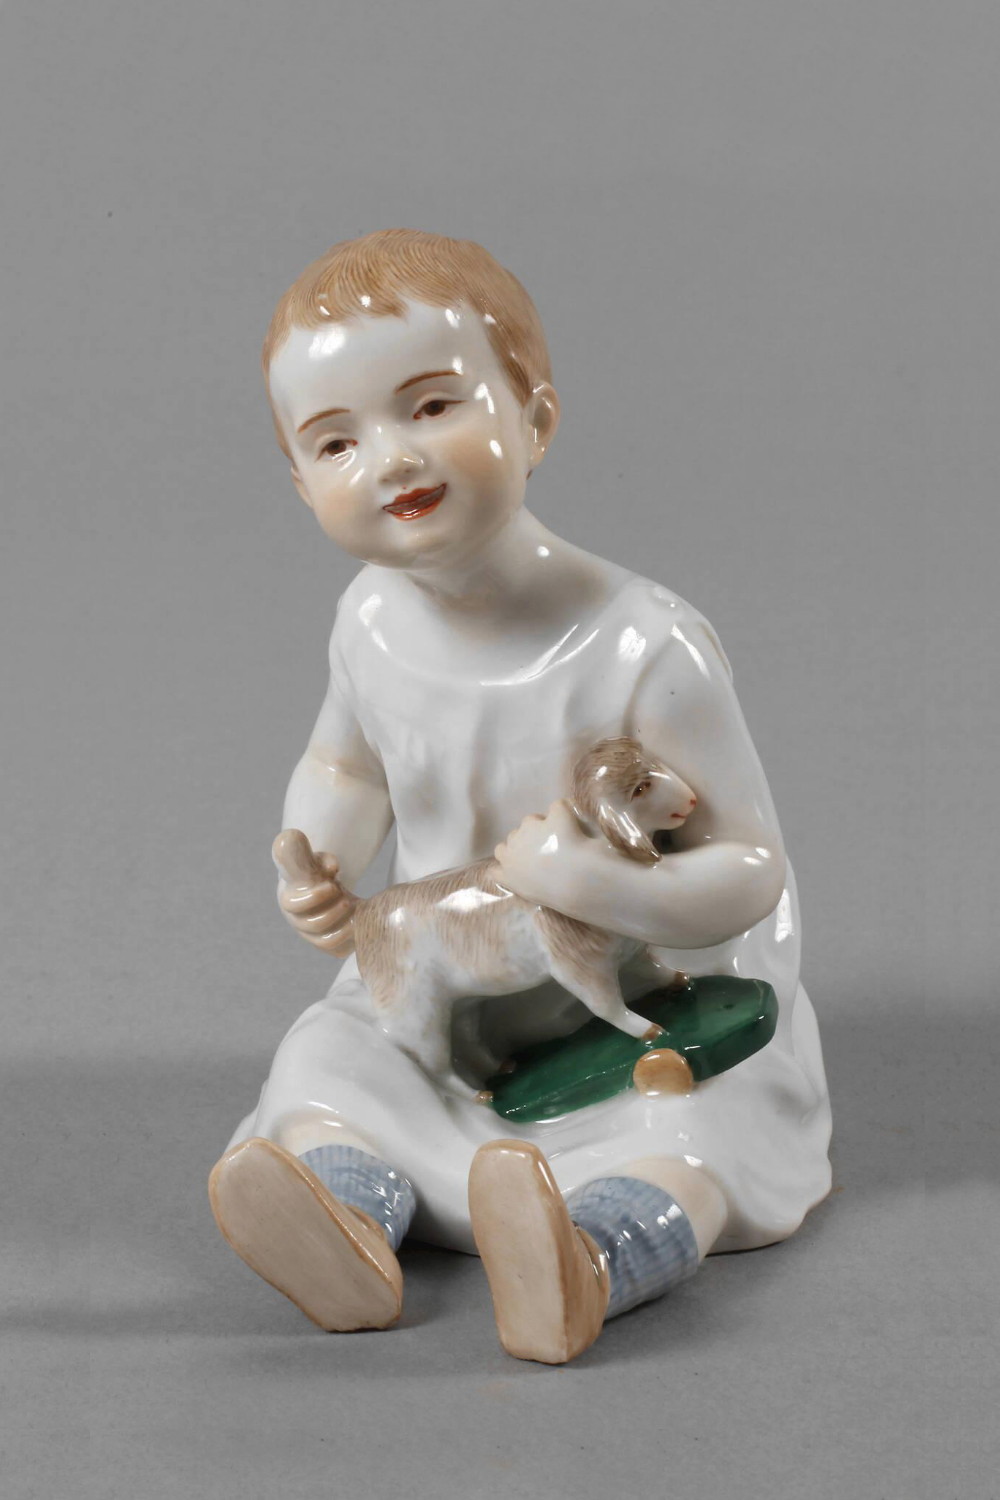 Meissen figure "Child with toy" by Oehler. Model number A233